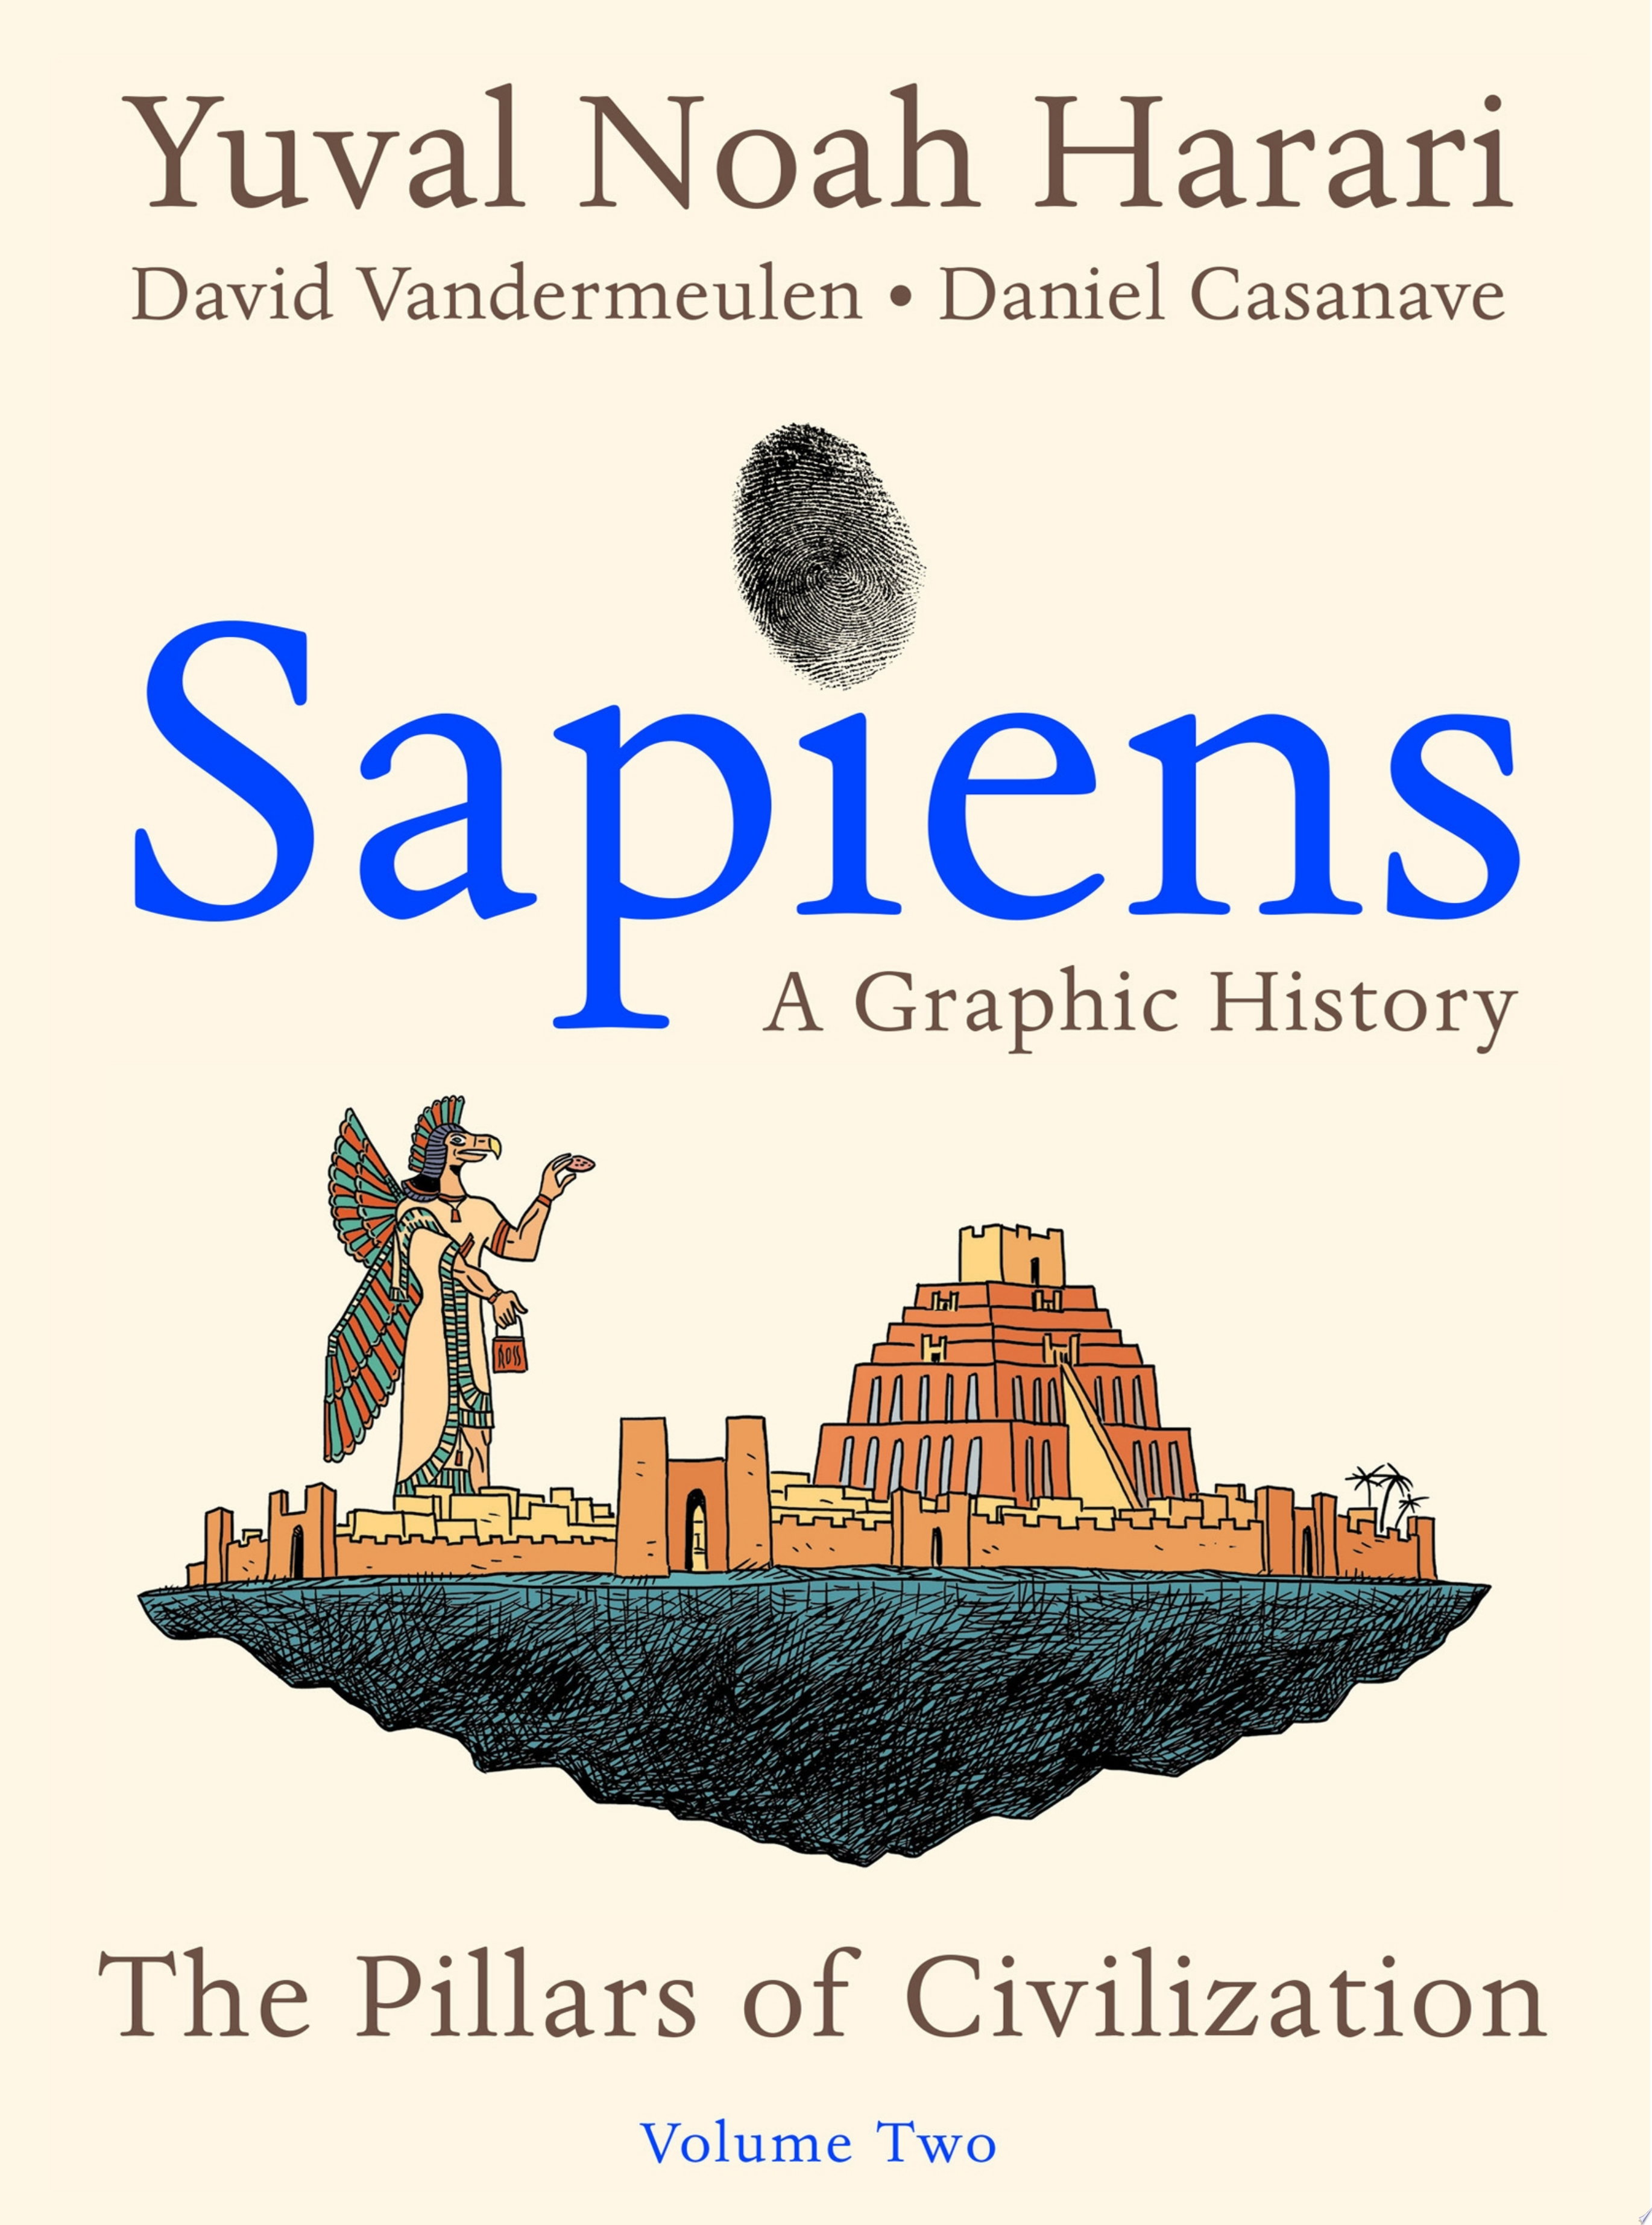 Image for "Sapiens: A Graphic History, Volume 2"